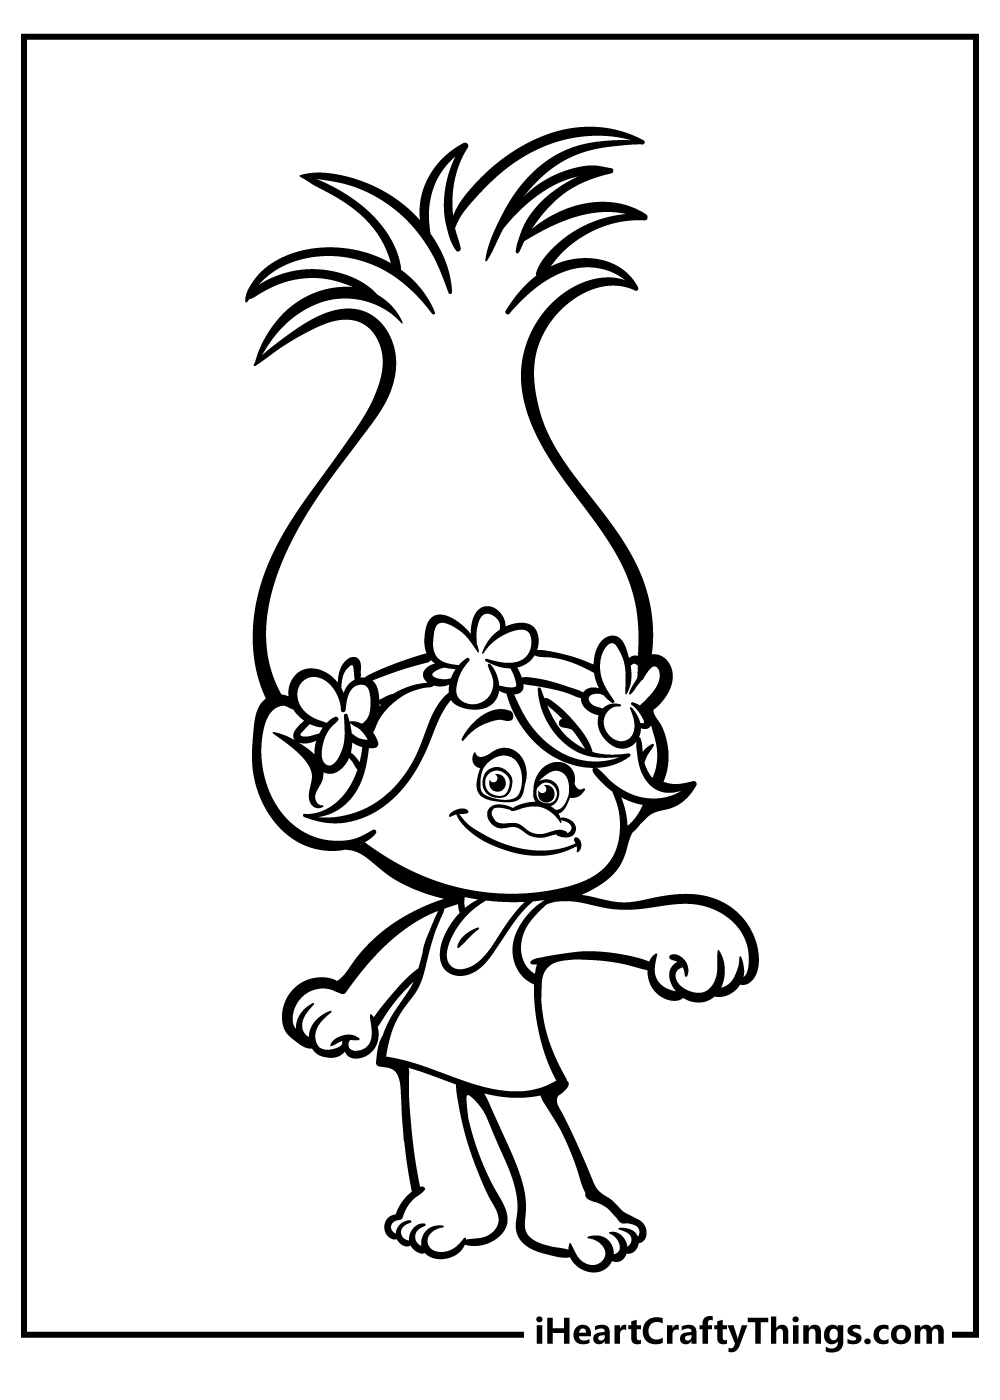 Troll coloring pages free printables